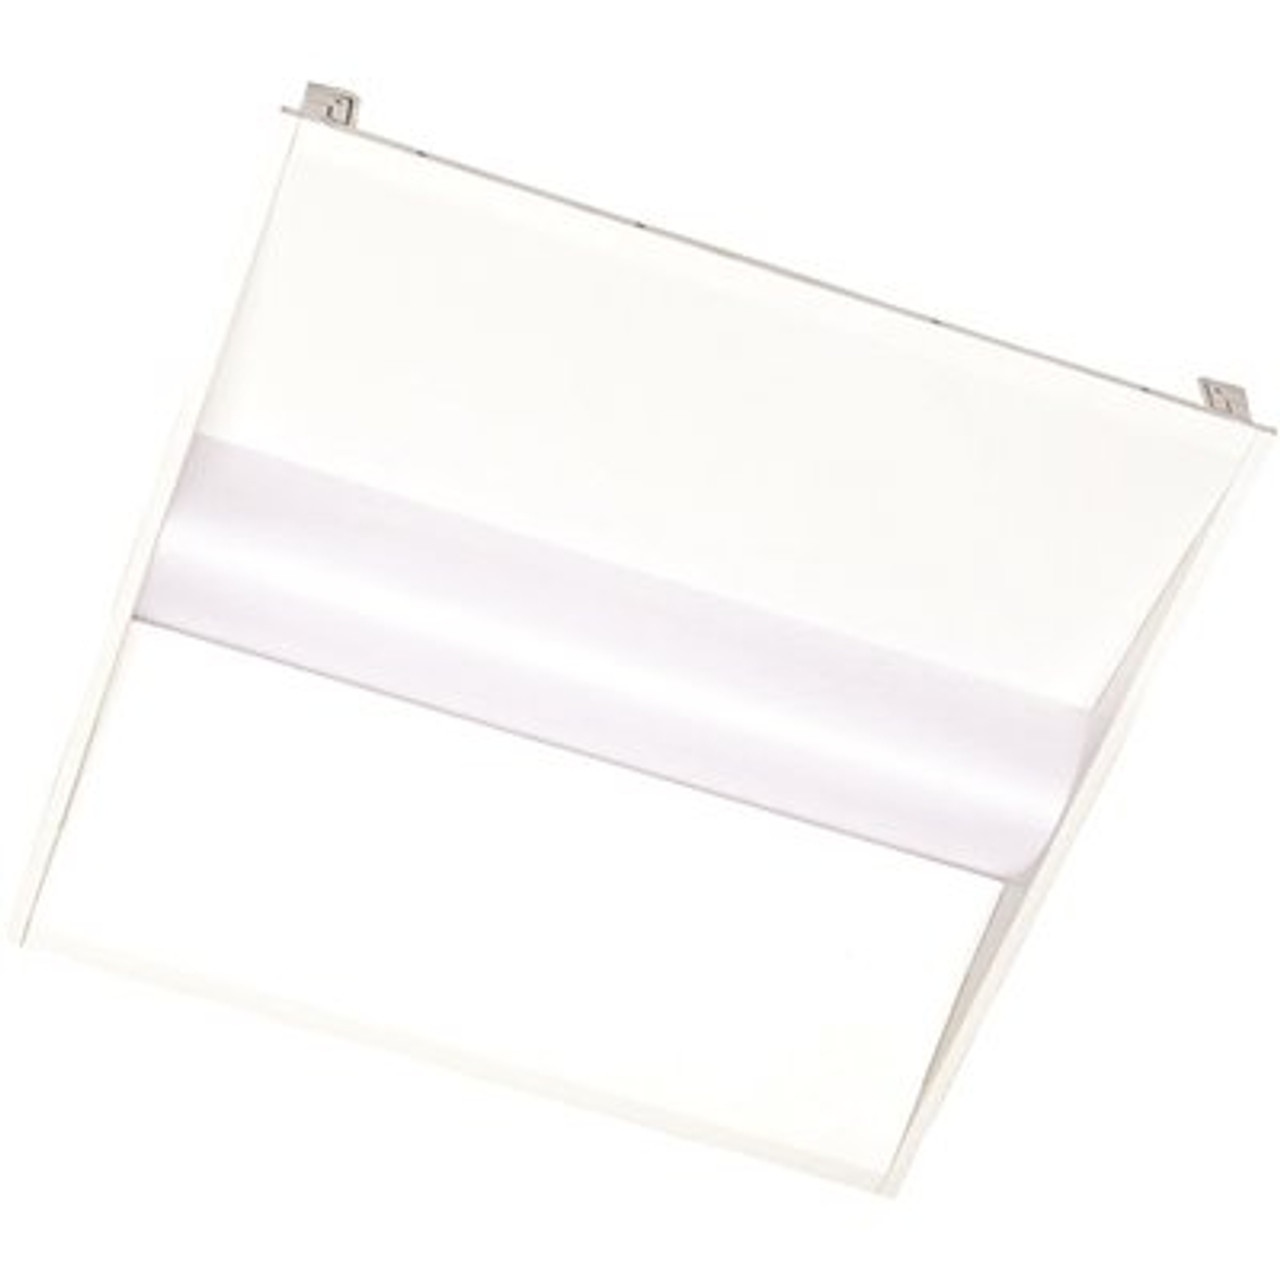 2 ft. x 4 ft. 3384- 5889 Lumens Volumetric Integrated LED White Panel Light, Wattage and CCT Selectable 3500/4000/5000K